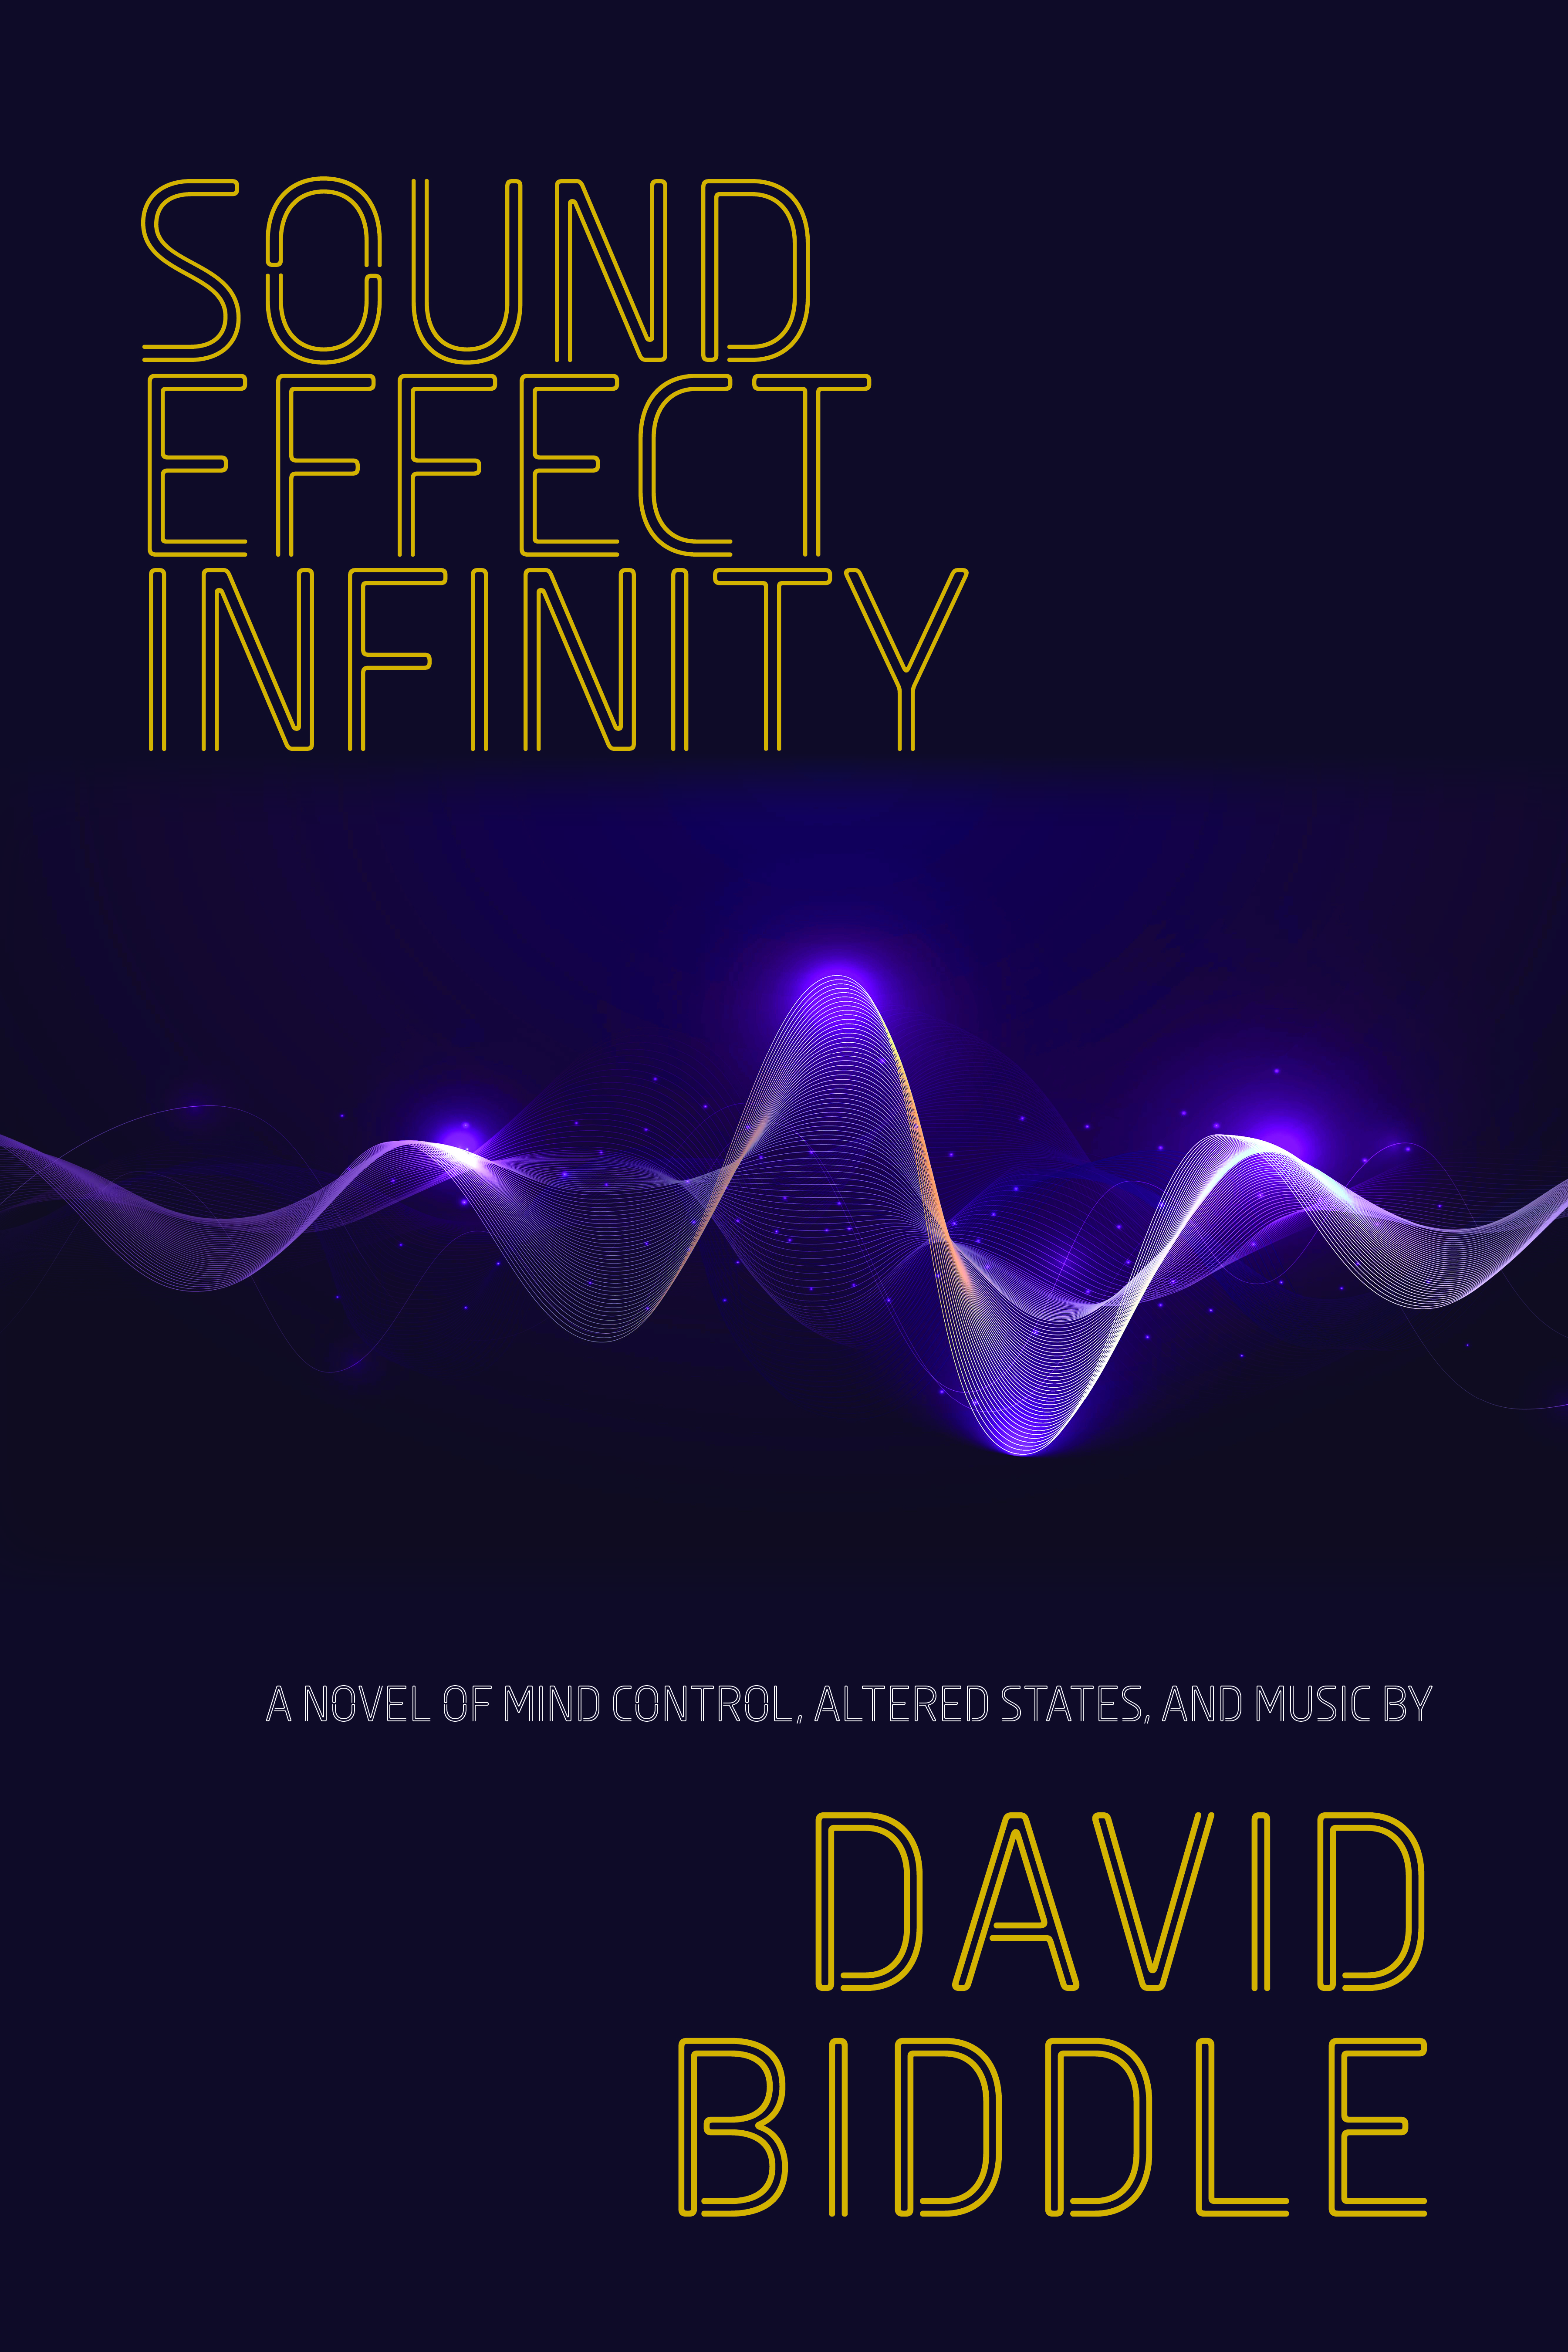 Check out the new novel Sound Effect Infinity